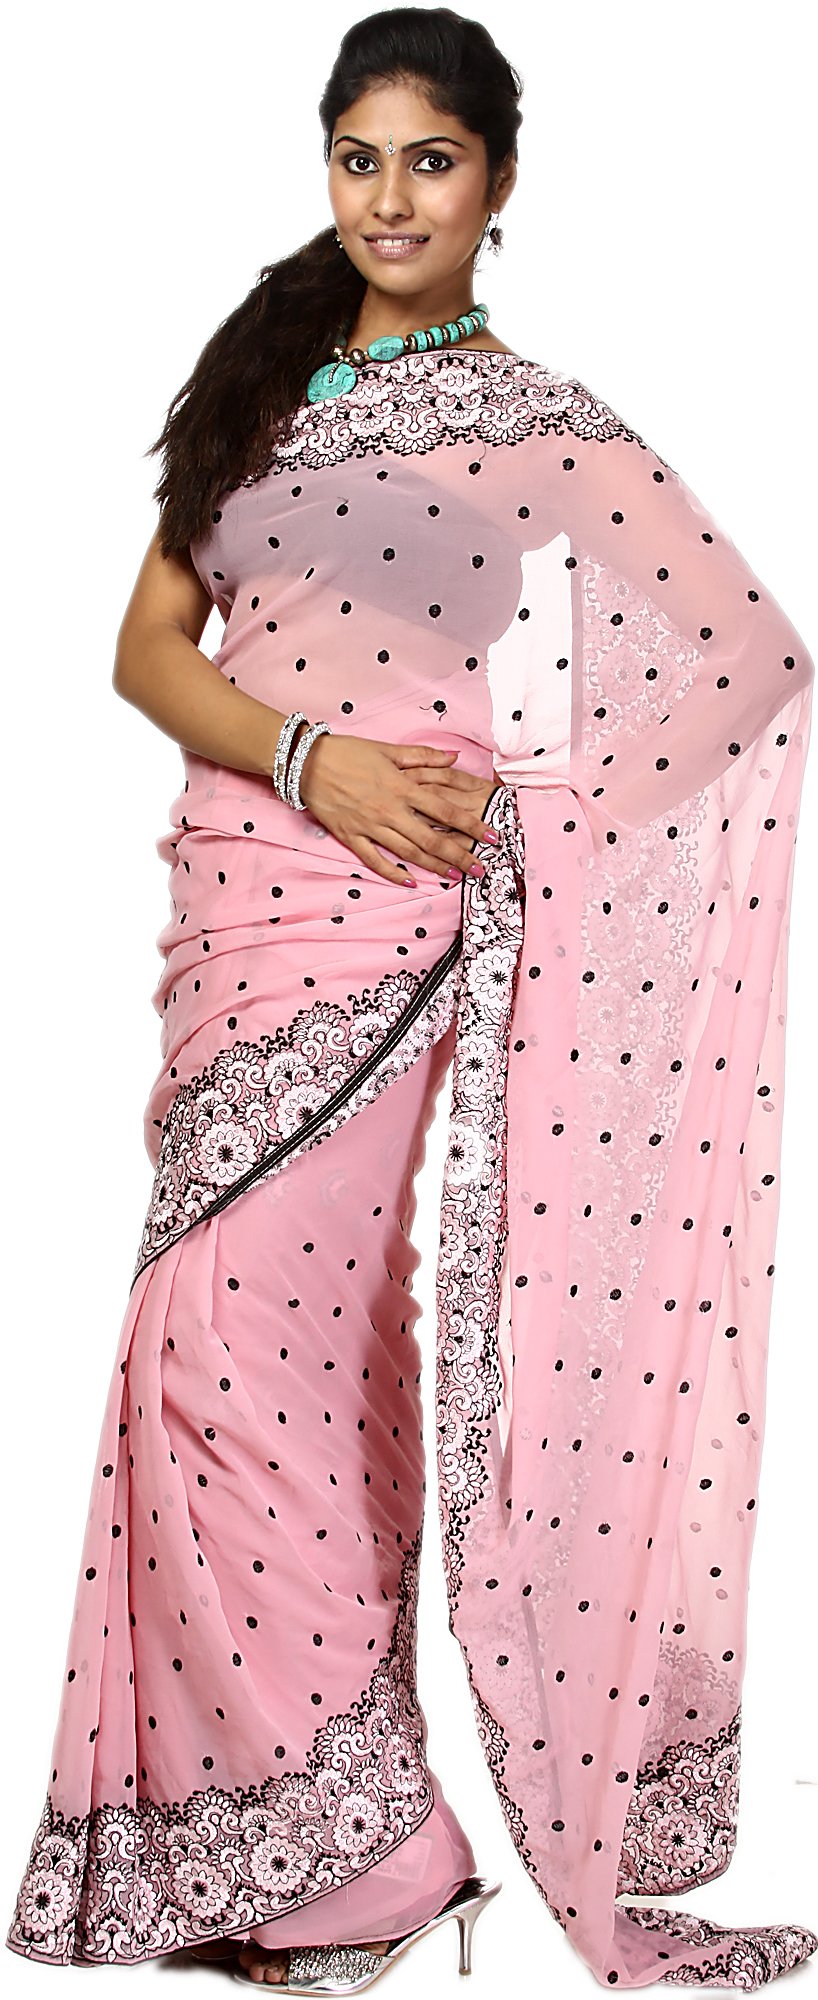 Powder Pink Sari With All Over Embroidered Bootis And Floral Border Exotic India Art